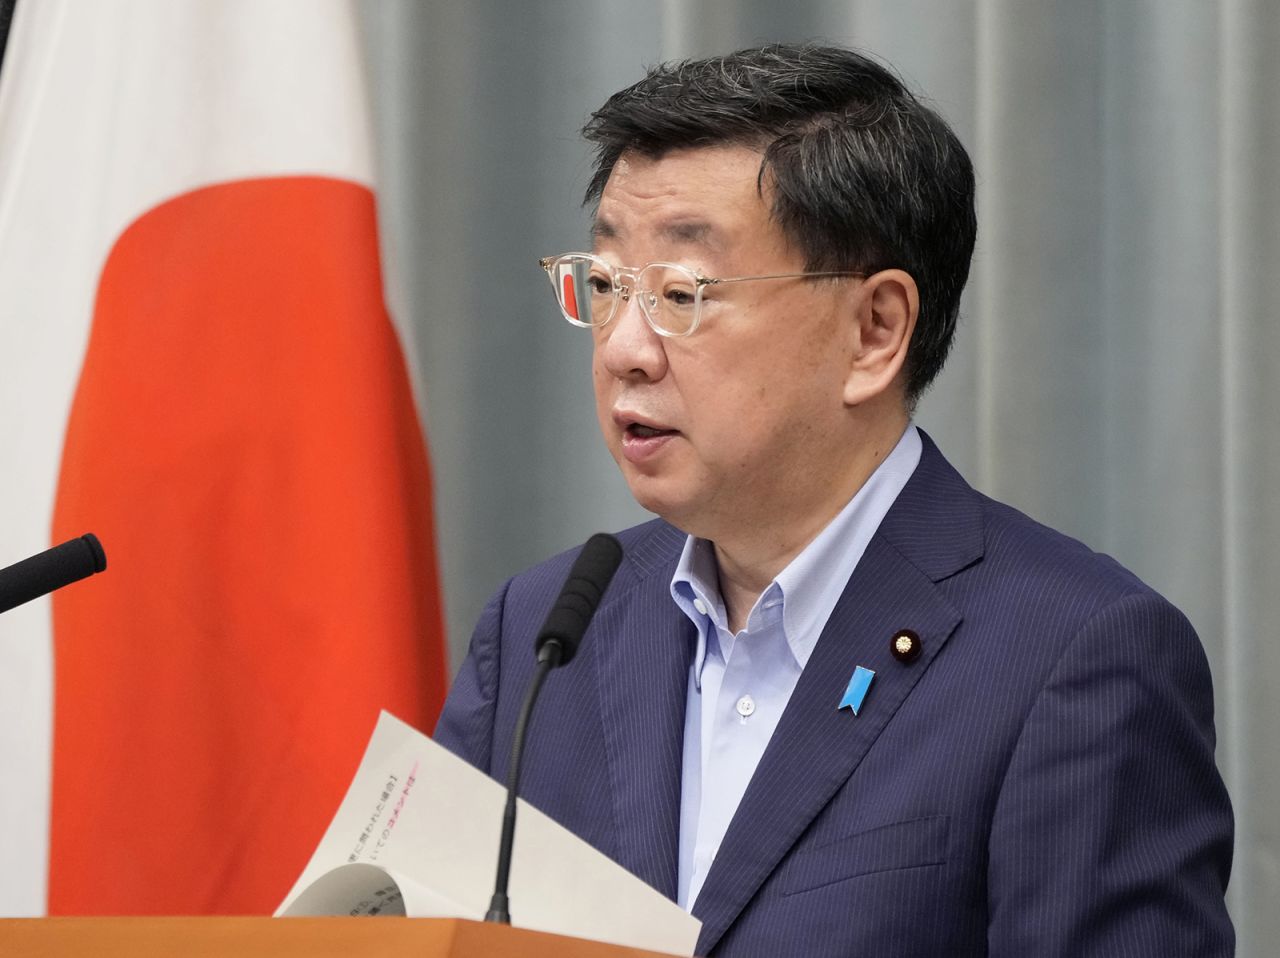 Japanese Chief Cabinet Secretary Hirokazu Matsuno attends a news conference in Tokyo on August 24.